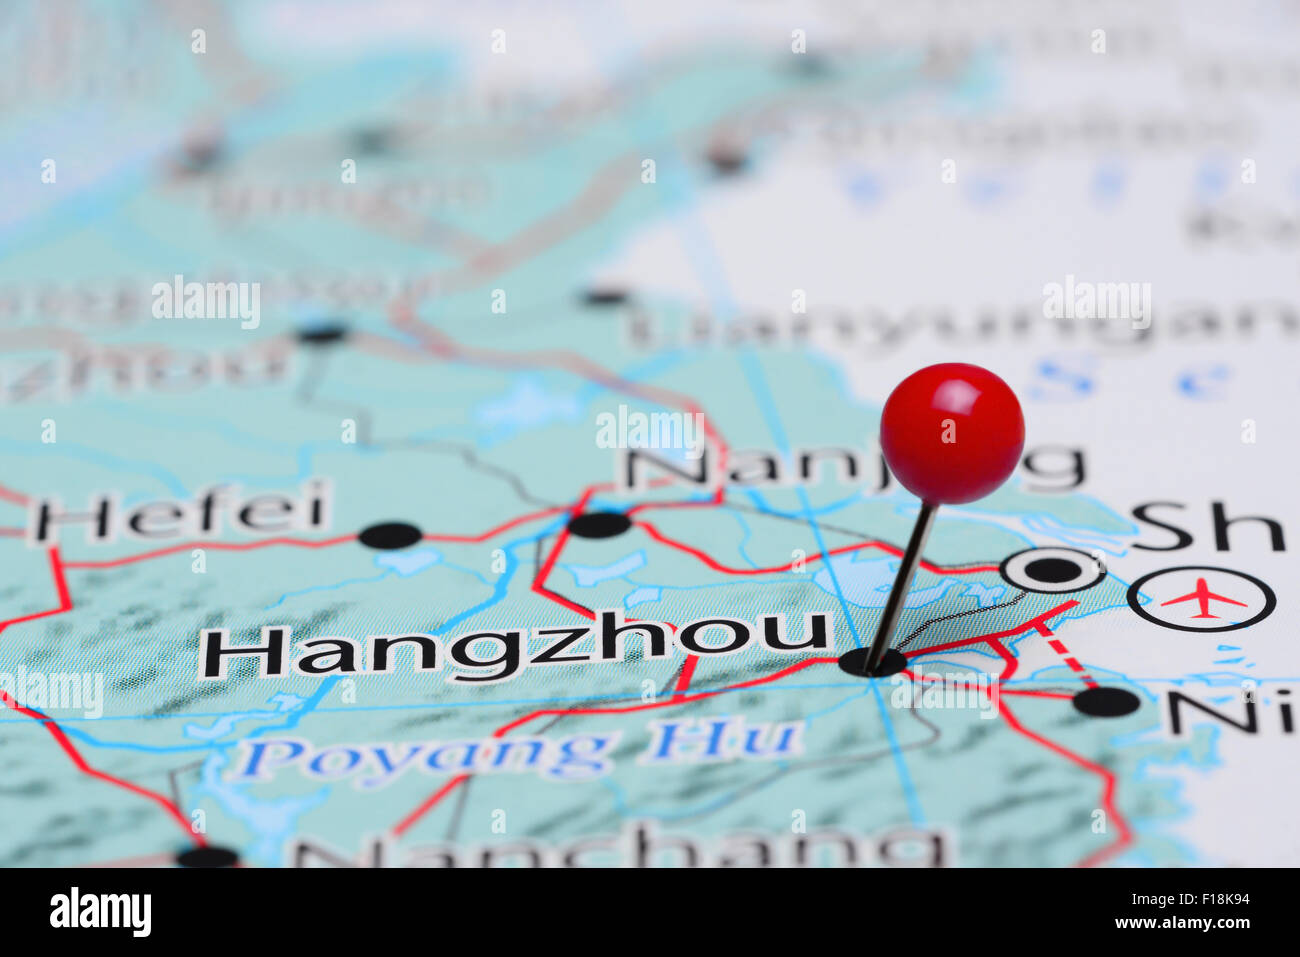 Hangzhou pinned on a map of Asia Stock Photo